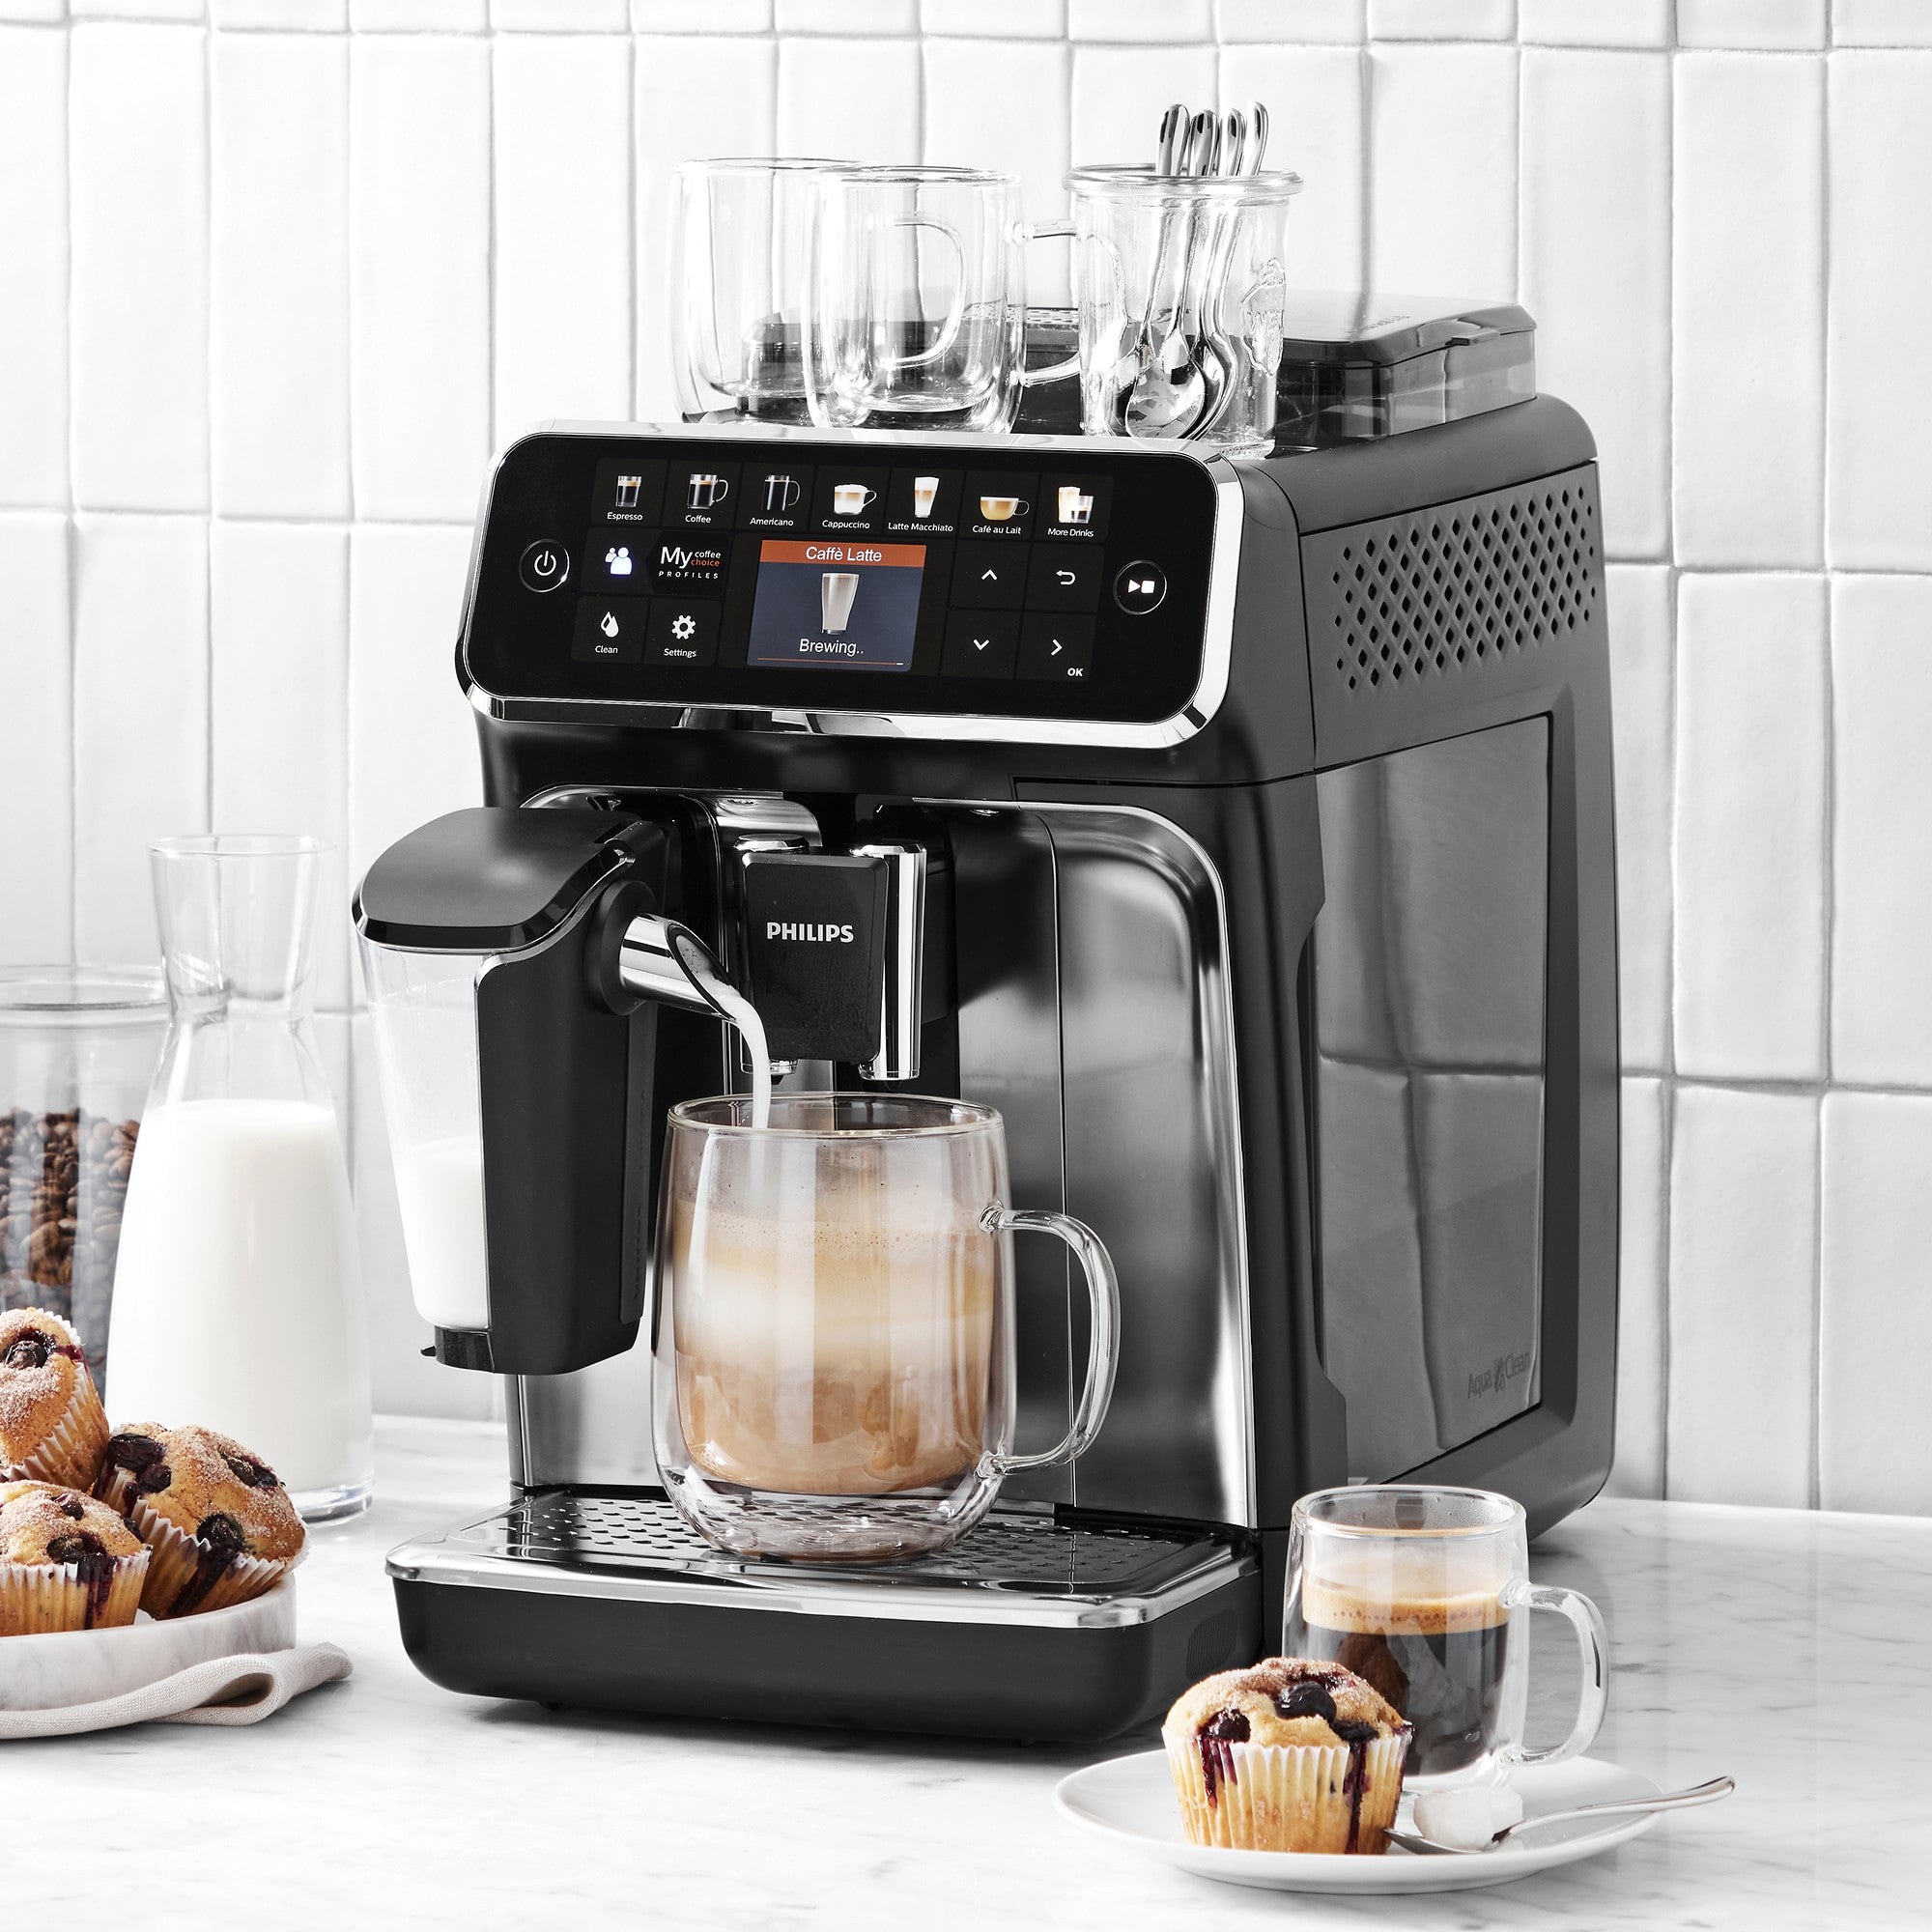 PHILIPS 5400 Series Fully Automatic Espresso & LatteGo Machine [LIMITED SALE]